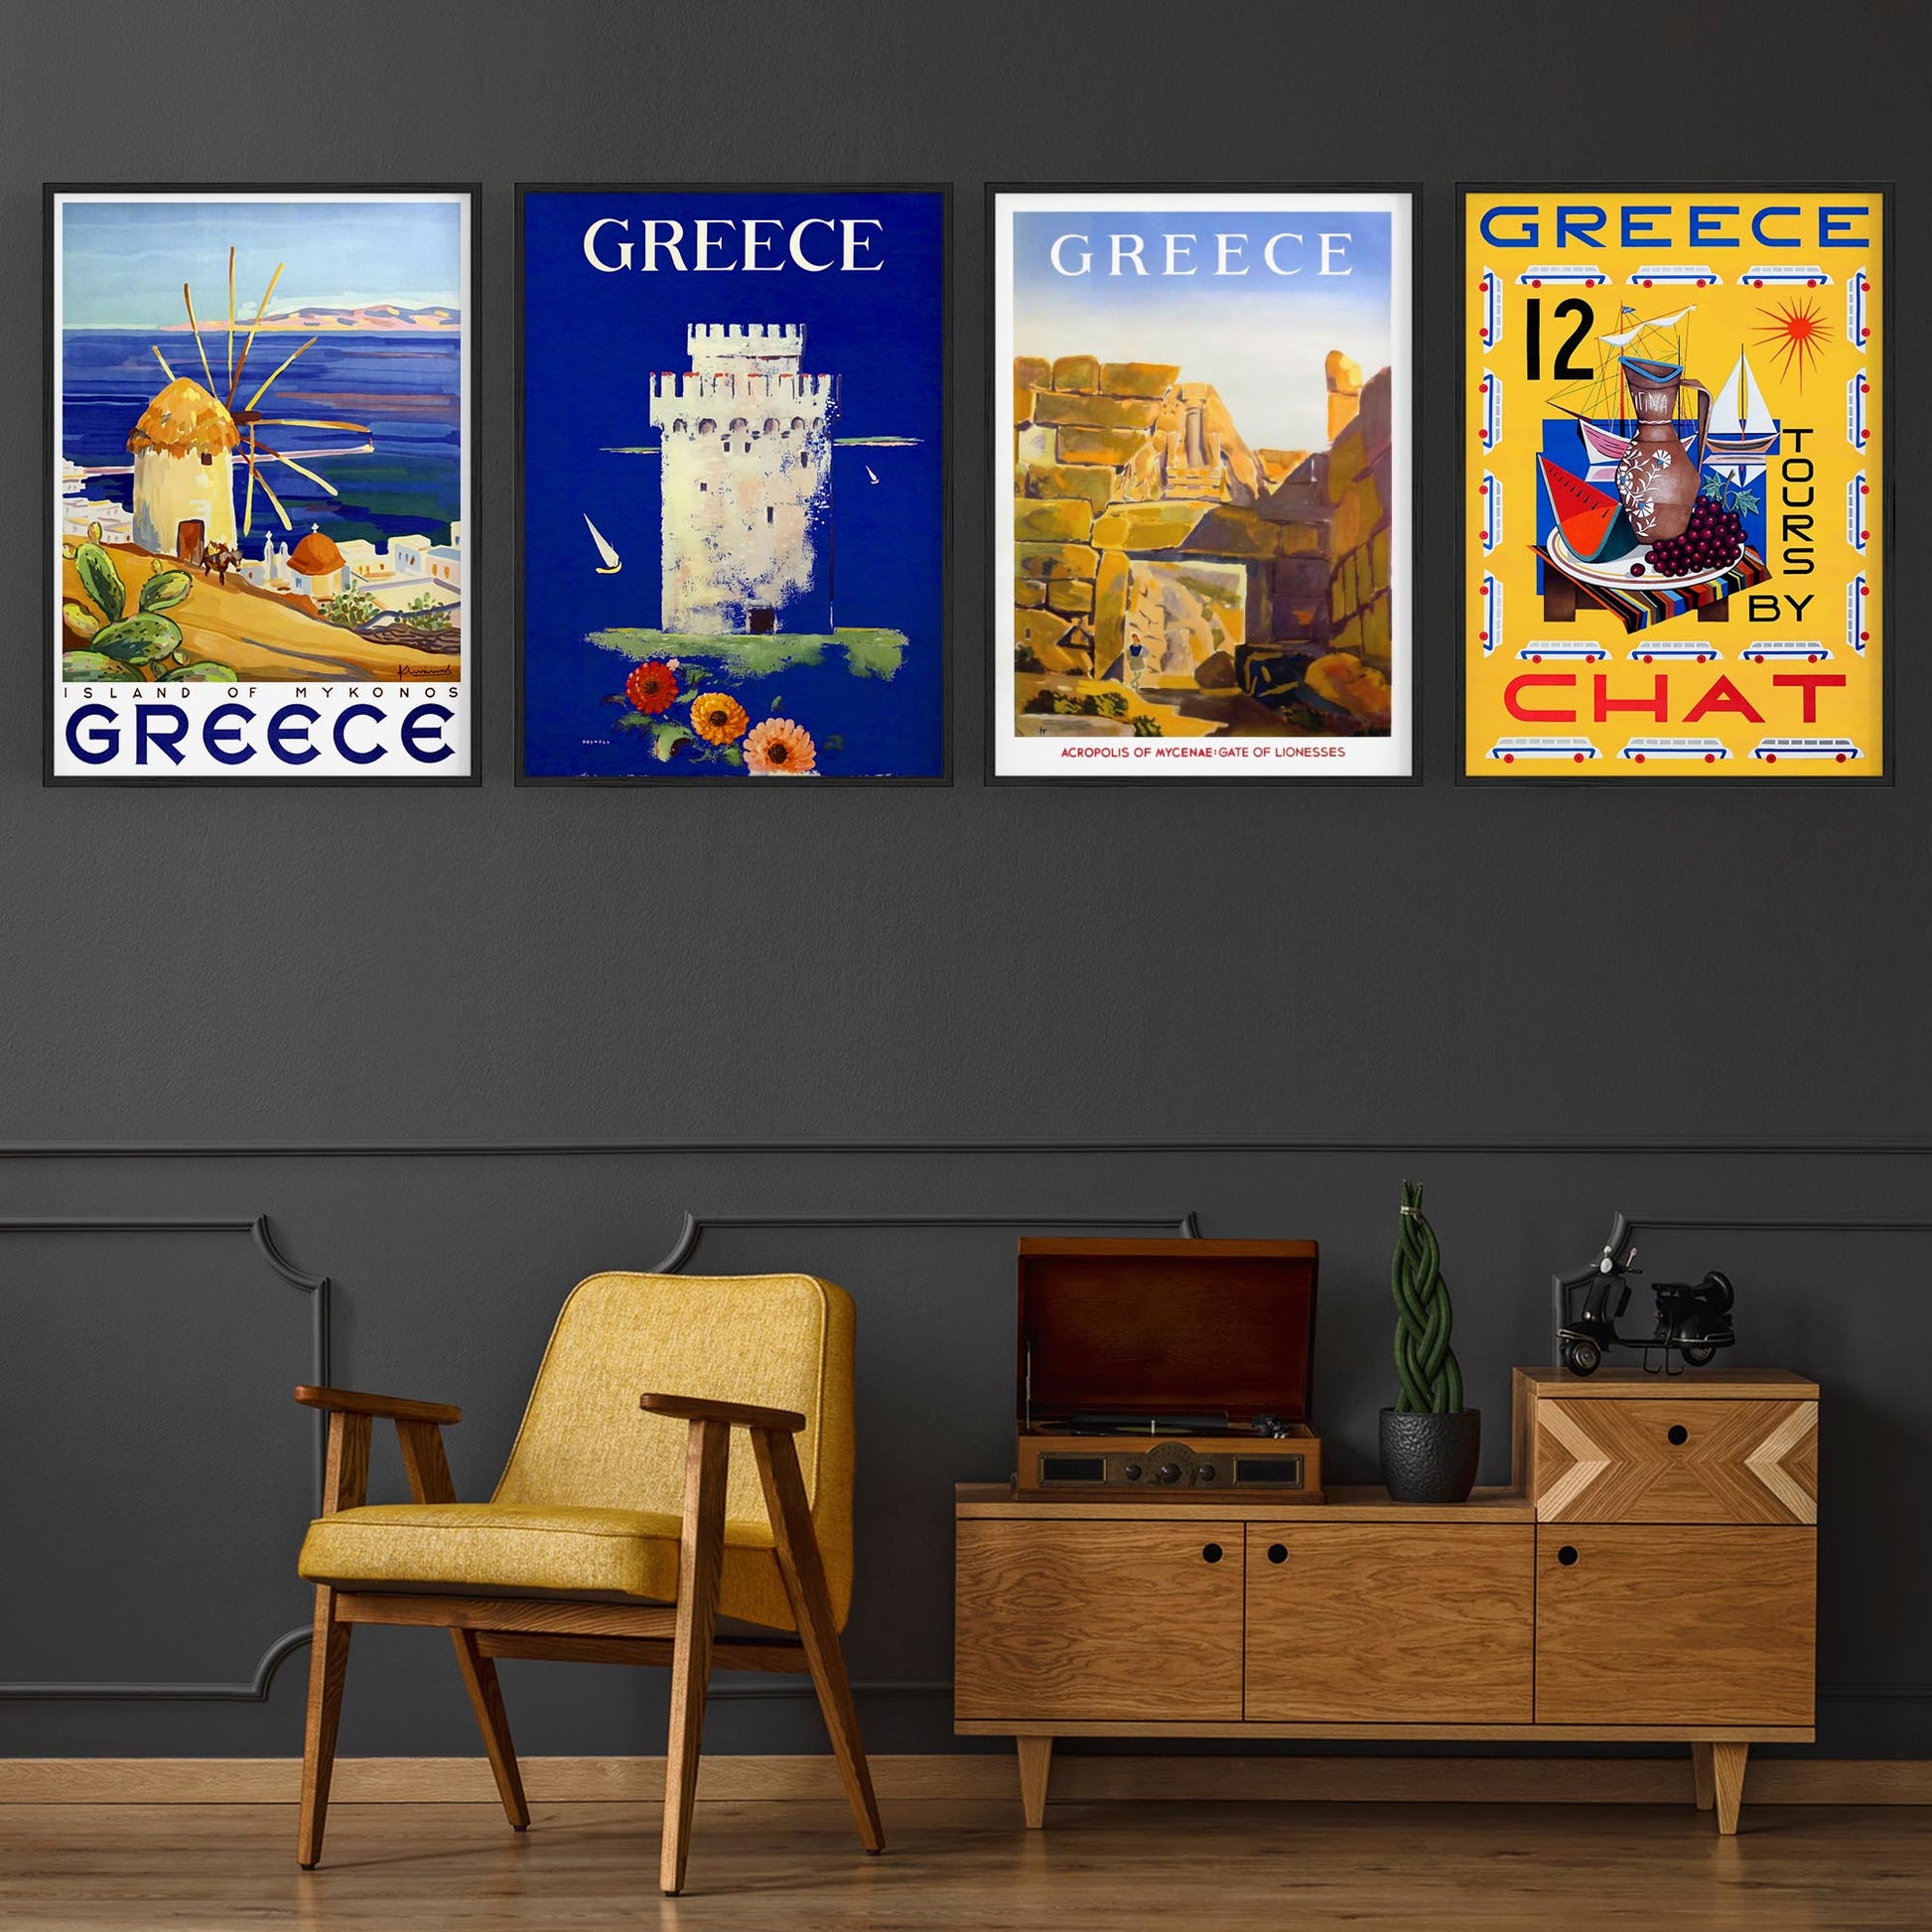 Set of 4 Vintage Greek Travel Advertisements Wall Art - The Affordable Art Company